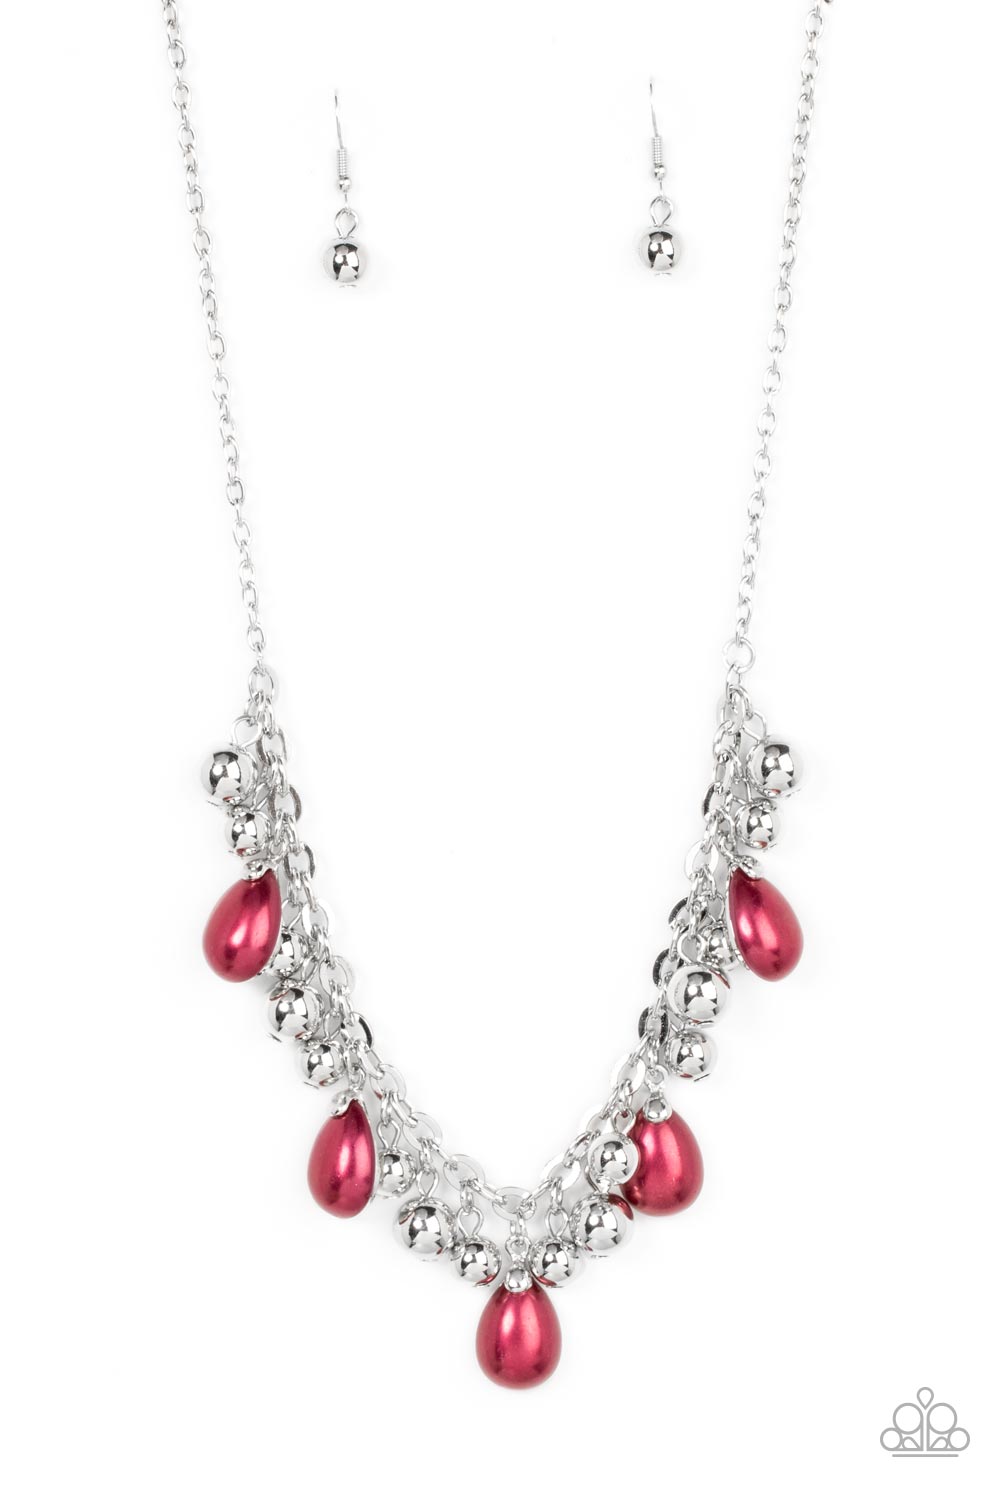 Party Favor - Red Pearls & Silver Beaded Paparazzi Necklace &. matching earrings